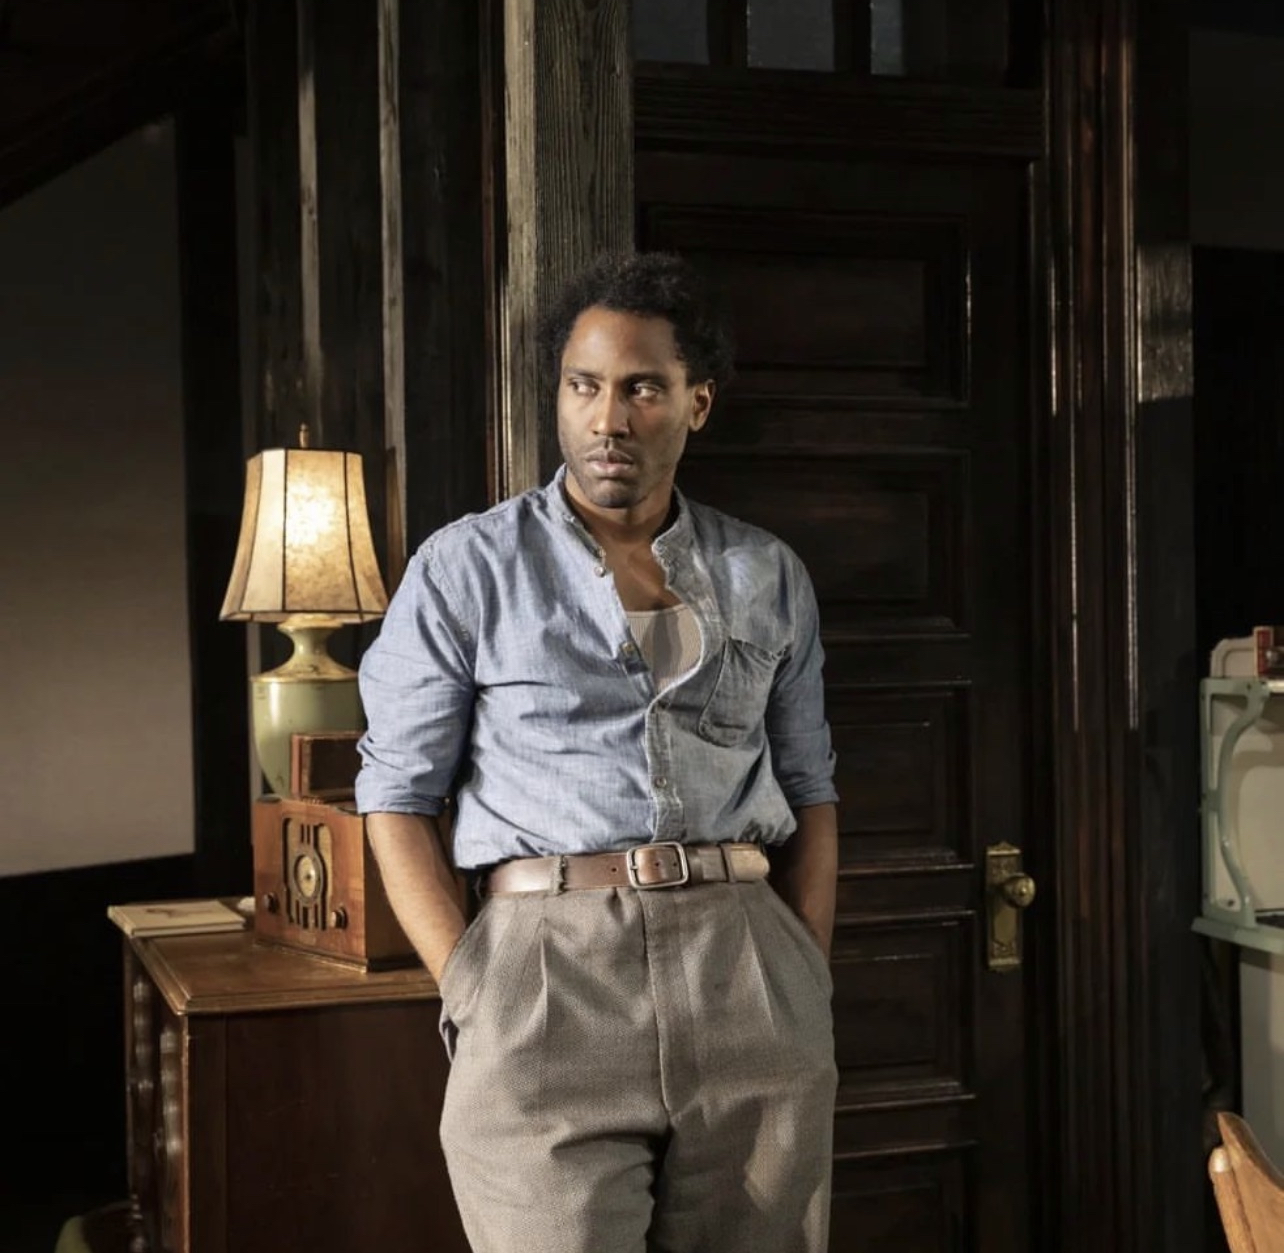 John David Washington as Boy Willie in The Broadway Play The Piano Lesson courtesy of pianolessonplay.com